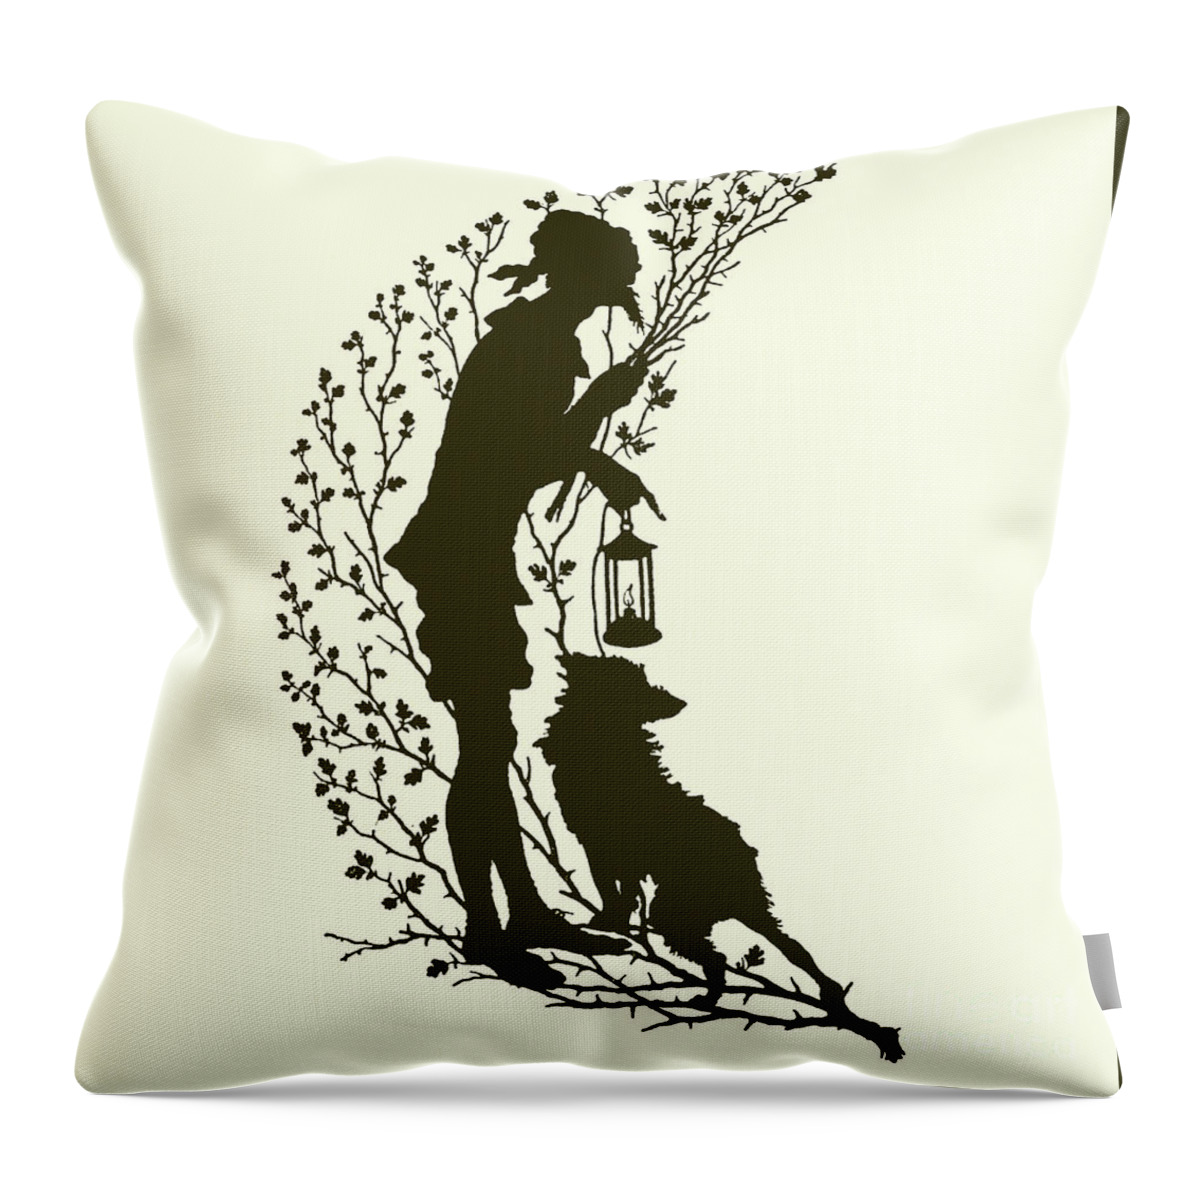 Moonshine Throw Pillow featuring the drawing A Midsummer Night's Dream, silhouette by Paul Konewka